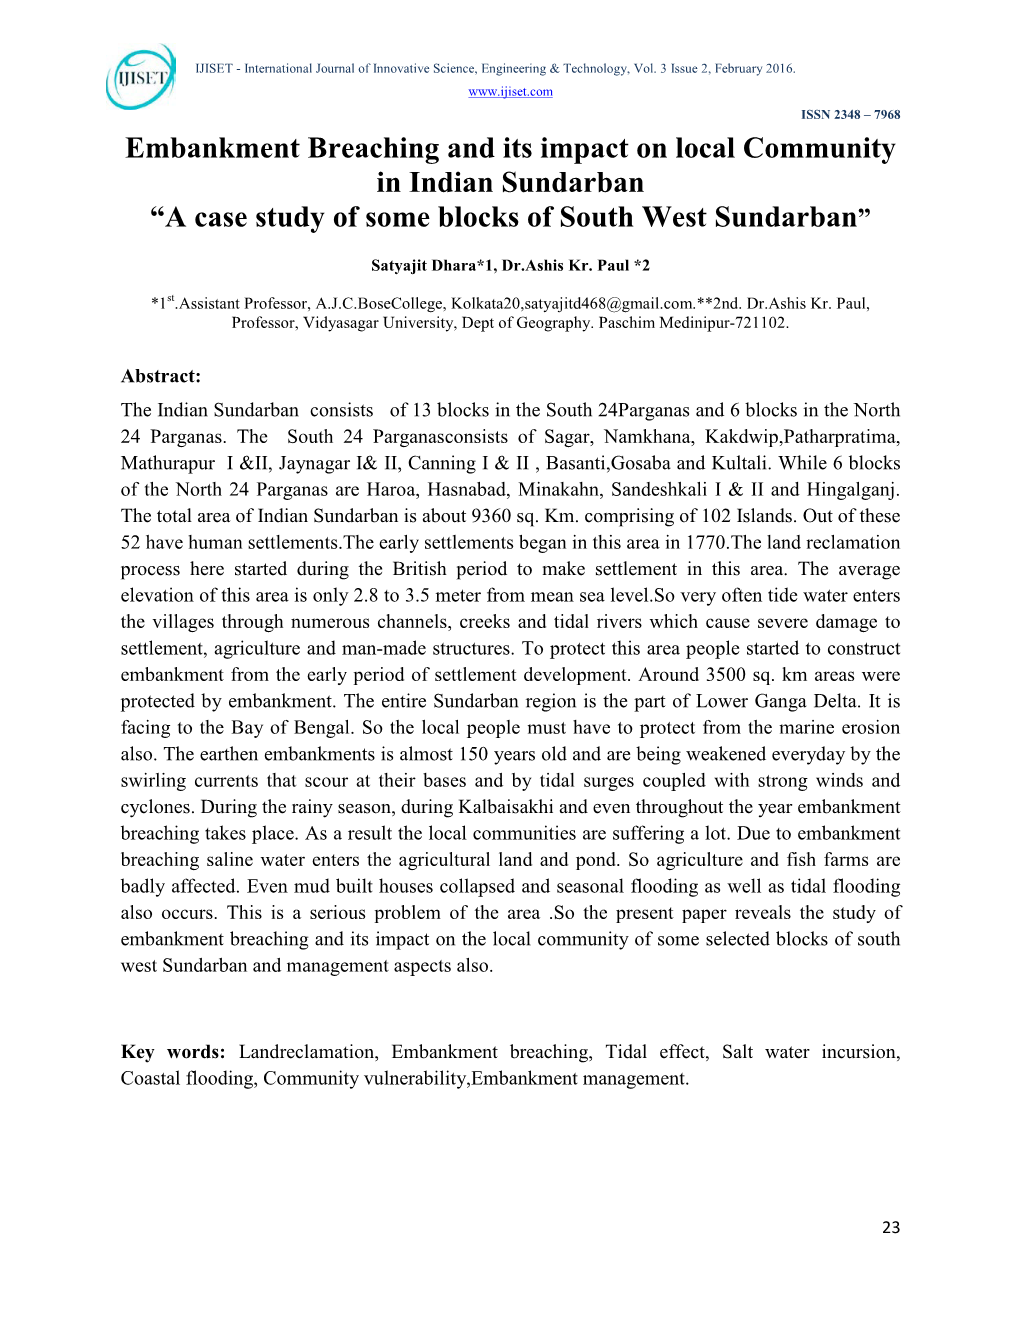 Embankment Breaching and Its Impact on Local Community in Indian Sundarban “A Case Study of Some Blocks of South West Sundarban”